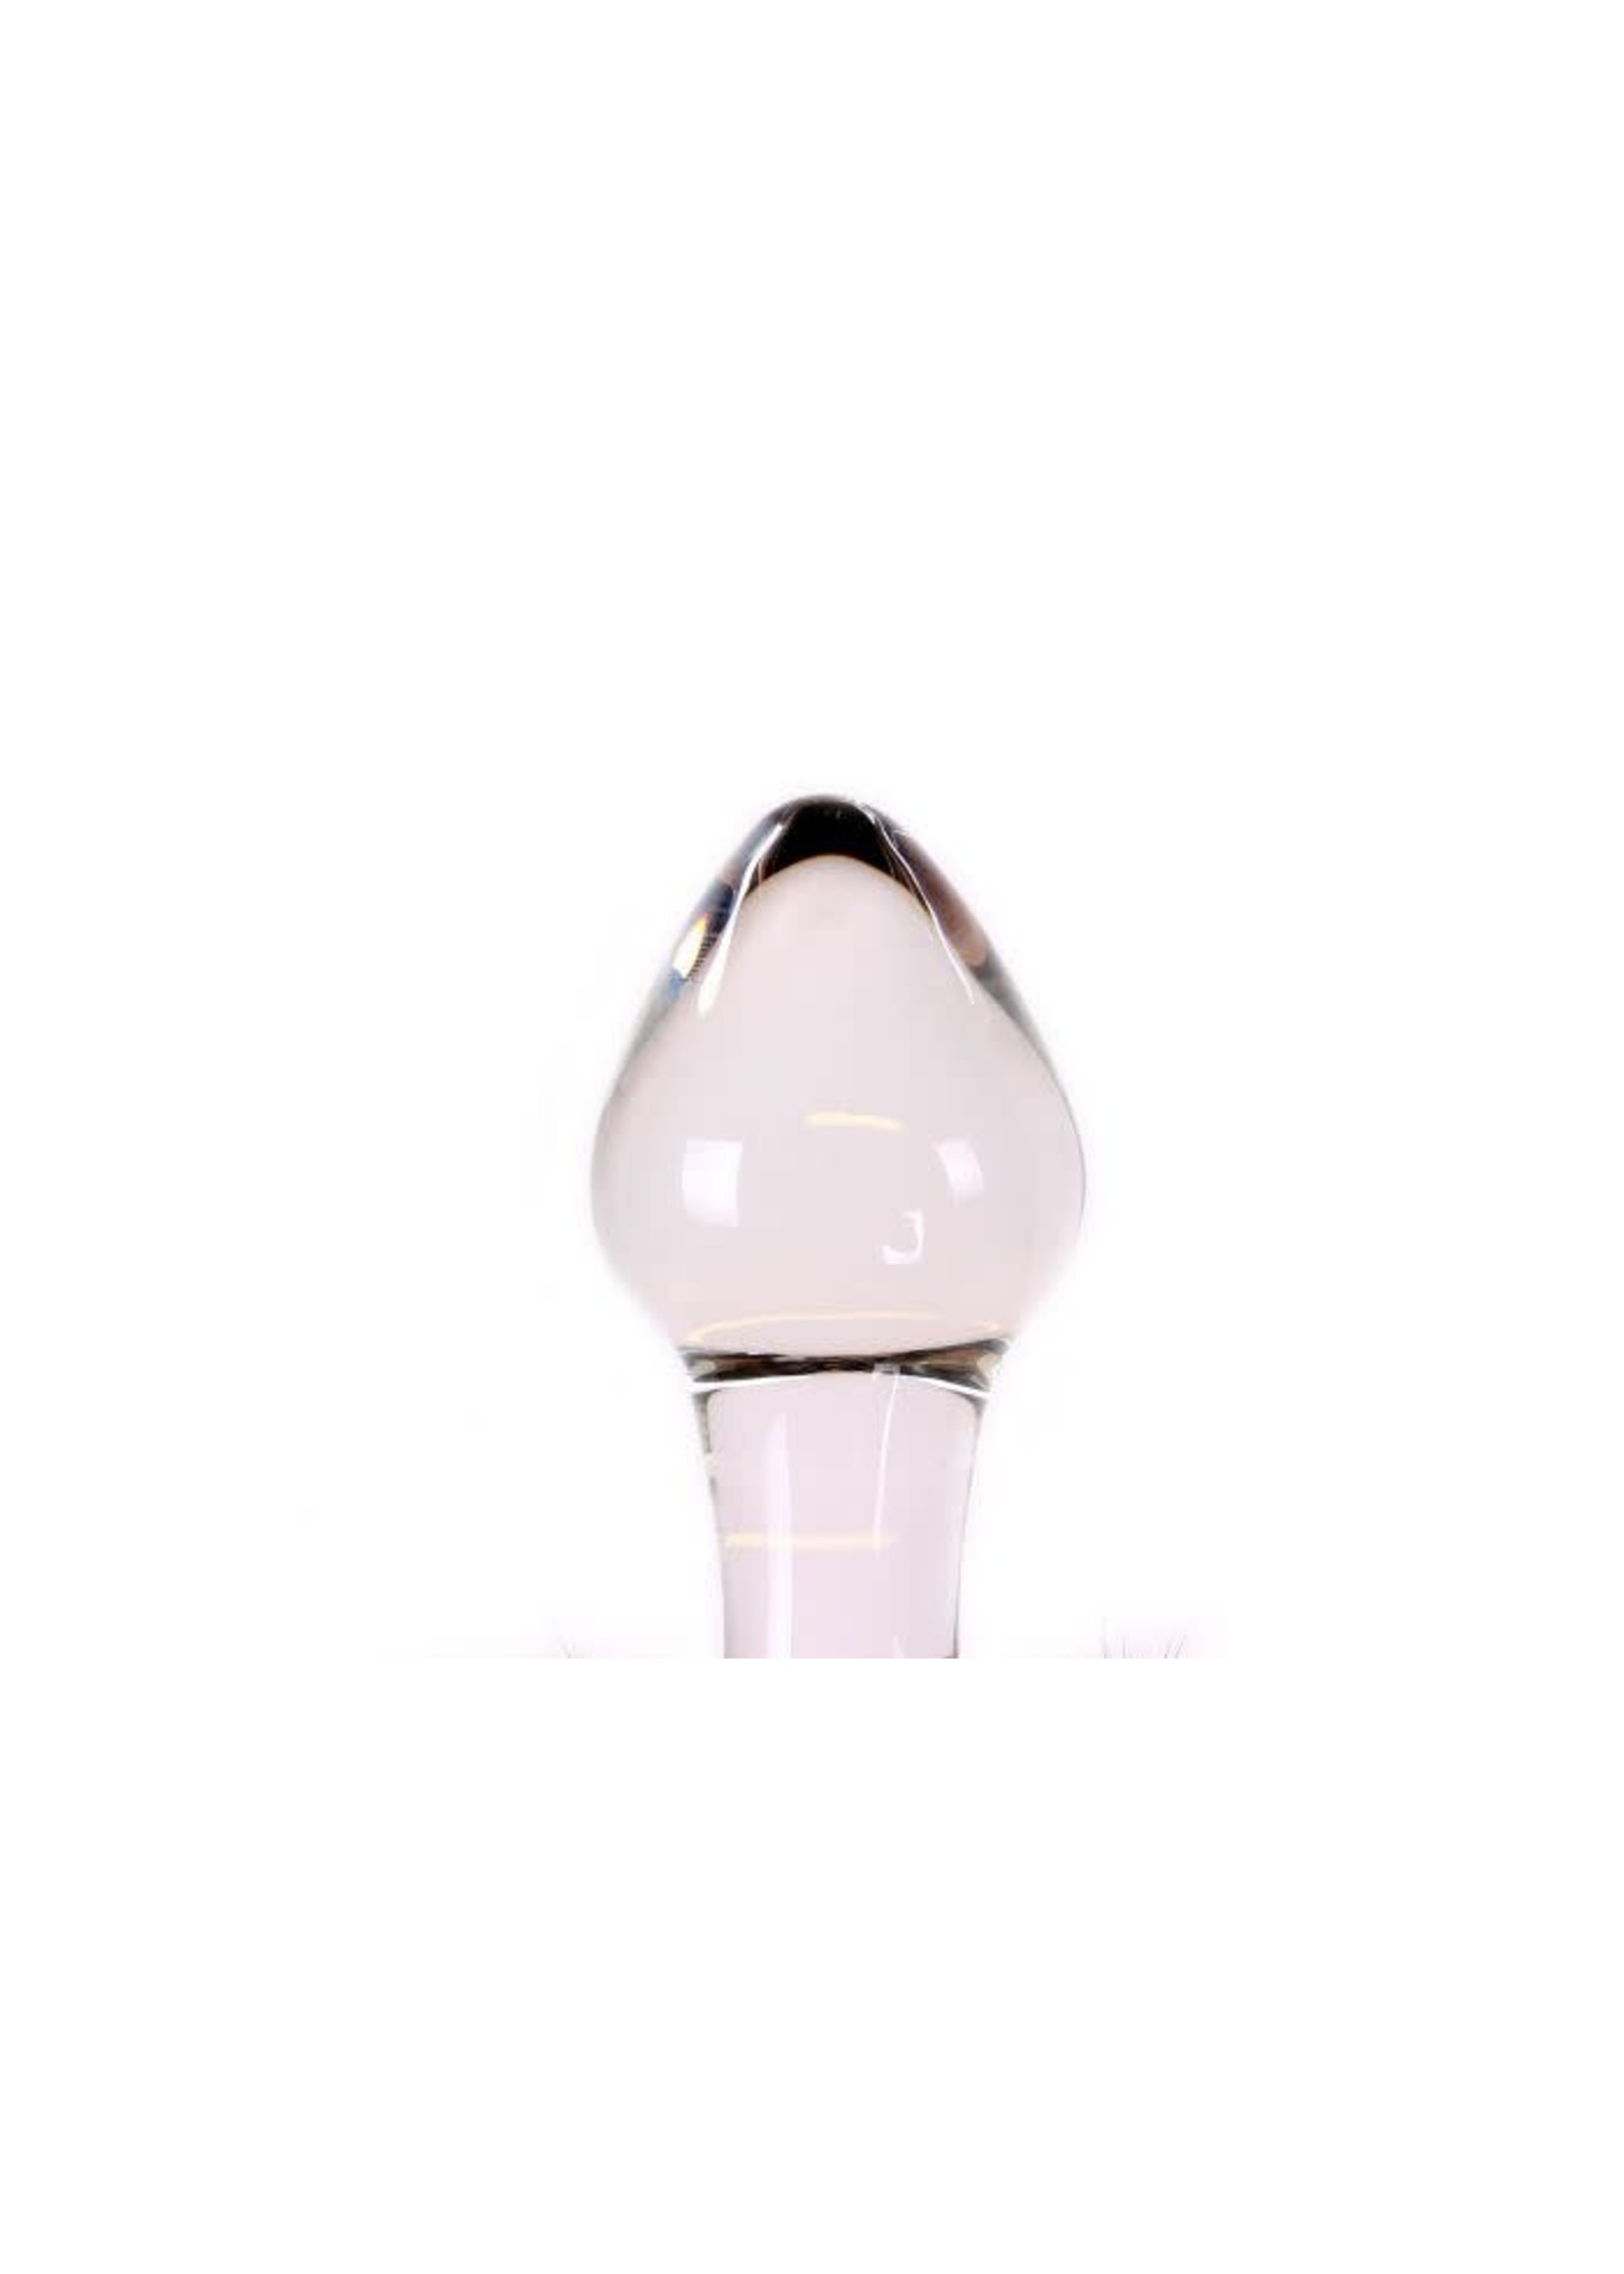 Kiotos Buttplug clear with black tickler